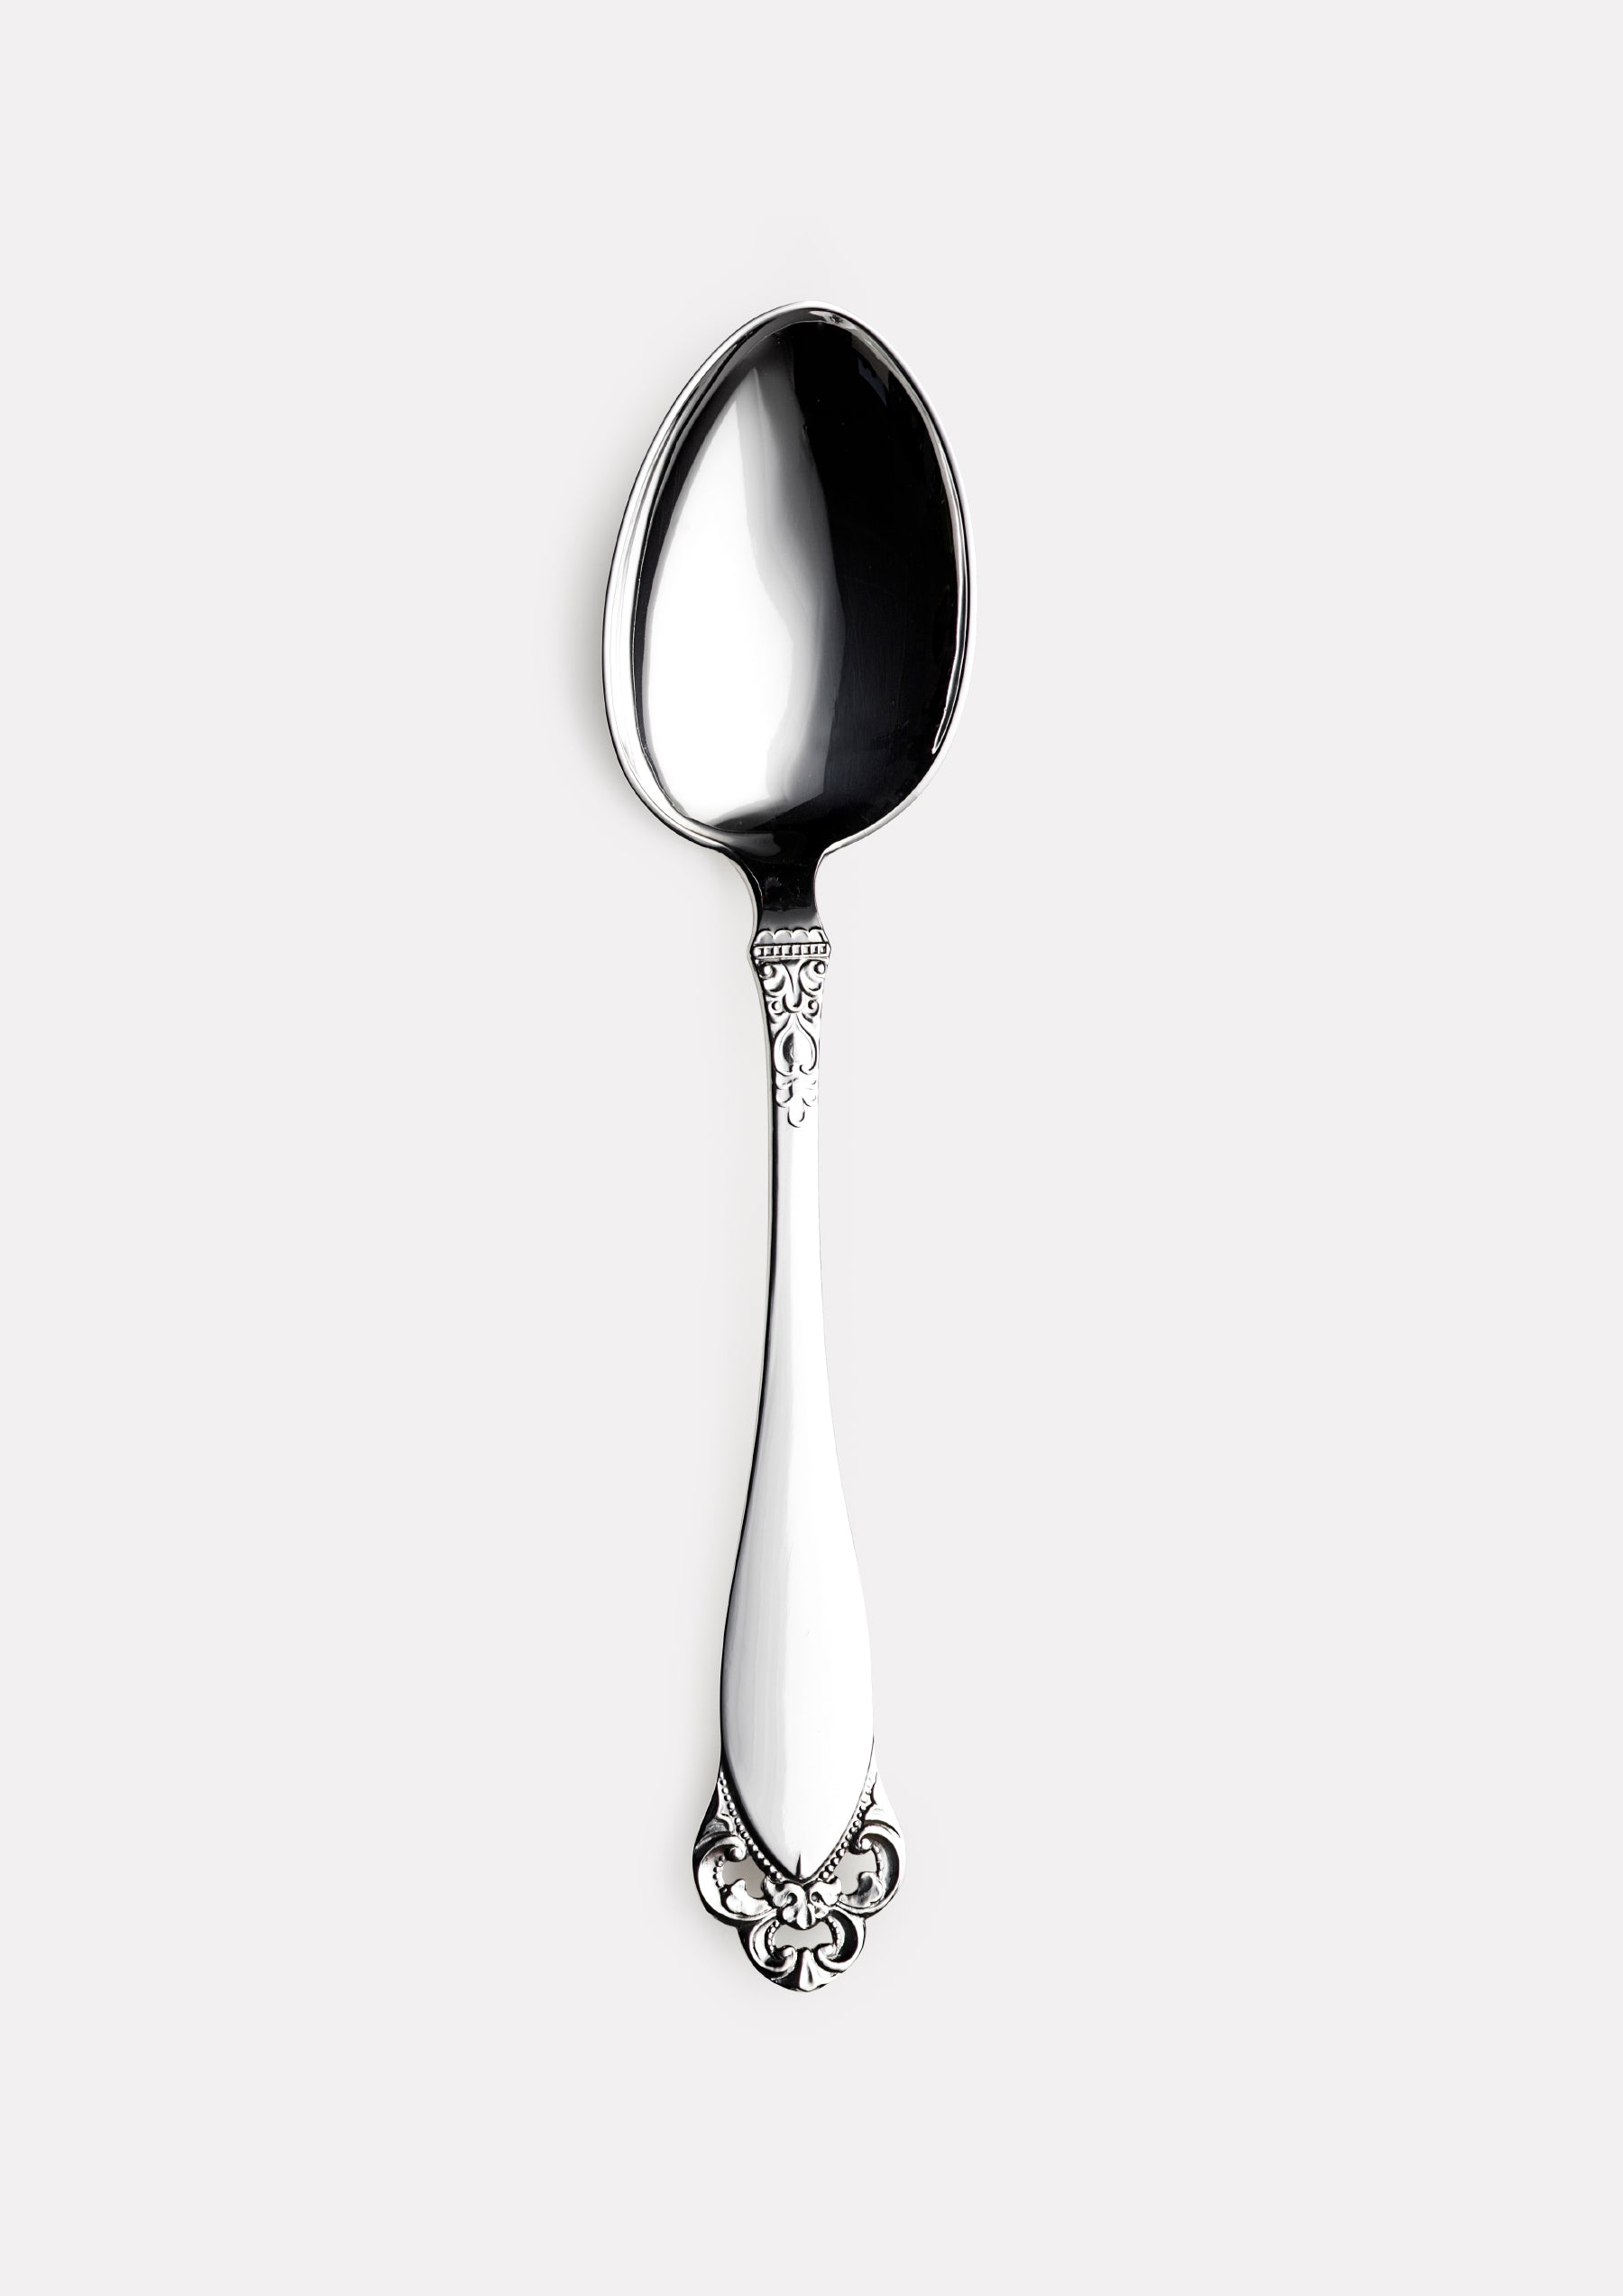 Laila large tablespoon 